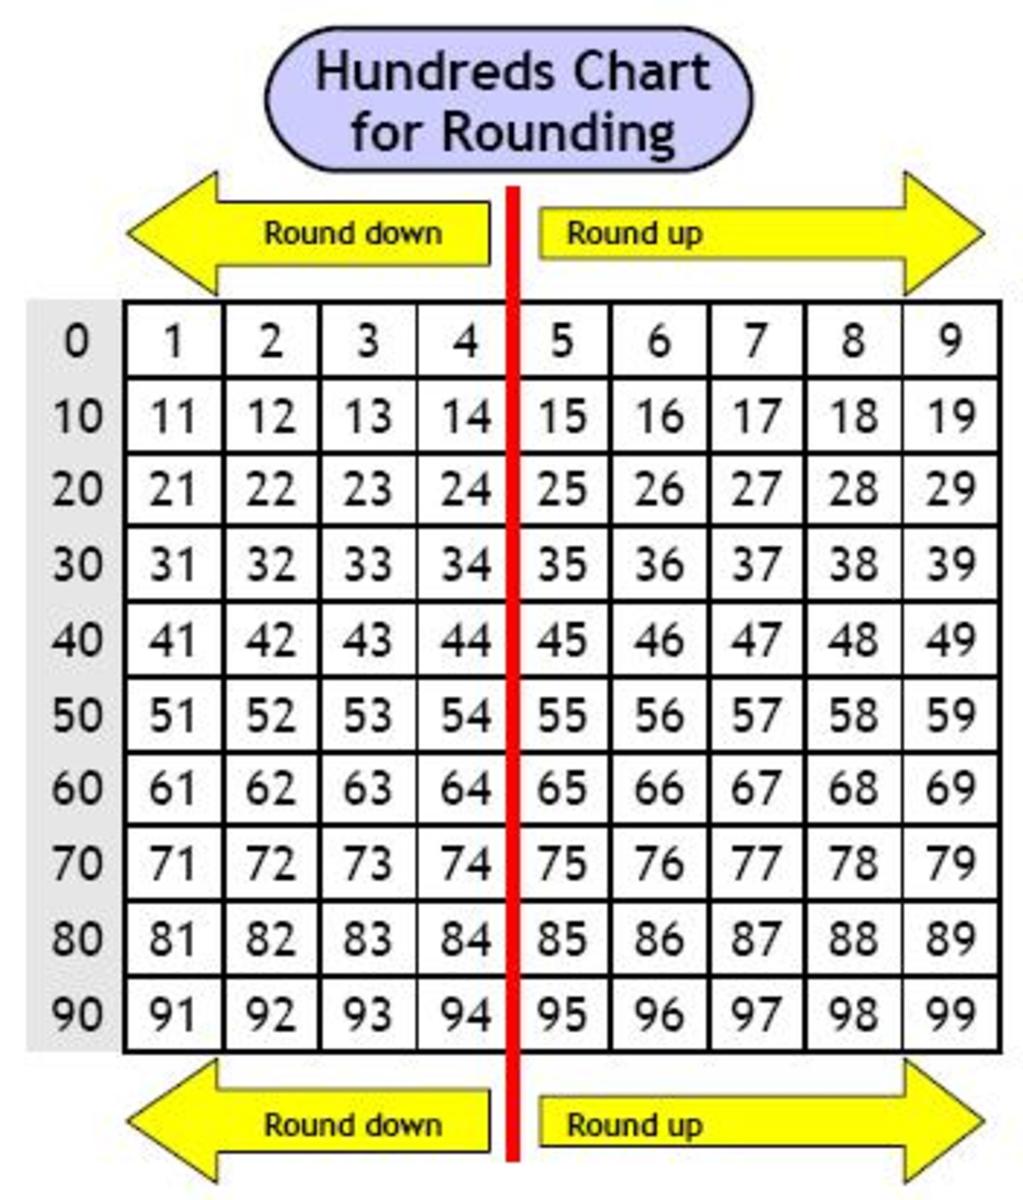 Rounding Numbers To The Nearest Whole Number Worksheets